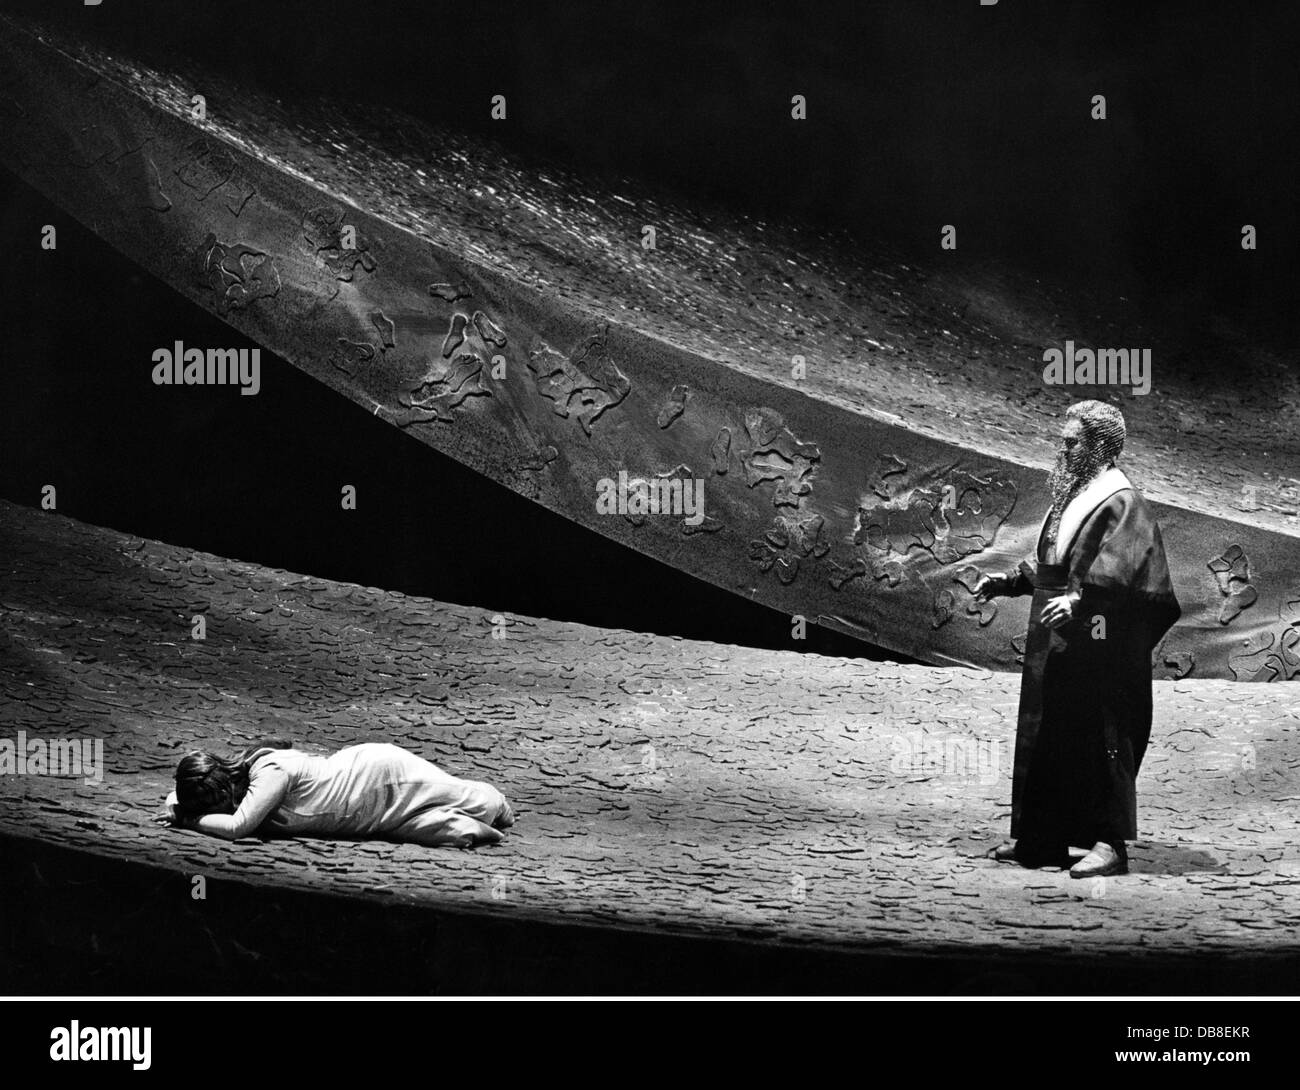 theatre / theater, opera, Richard Wagner Festival, Bayreuth, 1962, 'The Ring of the Nibelung', opera 'Siegfried', director: Wolfgang Wagner, musical conduct: Rudolf Kempe, scene with Hans Hopf (as Siegfried) and Birgit Nilsson (as Bruennhilde), Additional-Rights-Clearences-Not Available Stock Photo